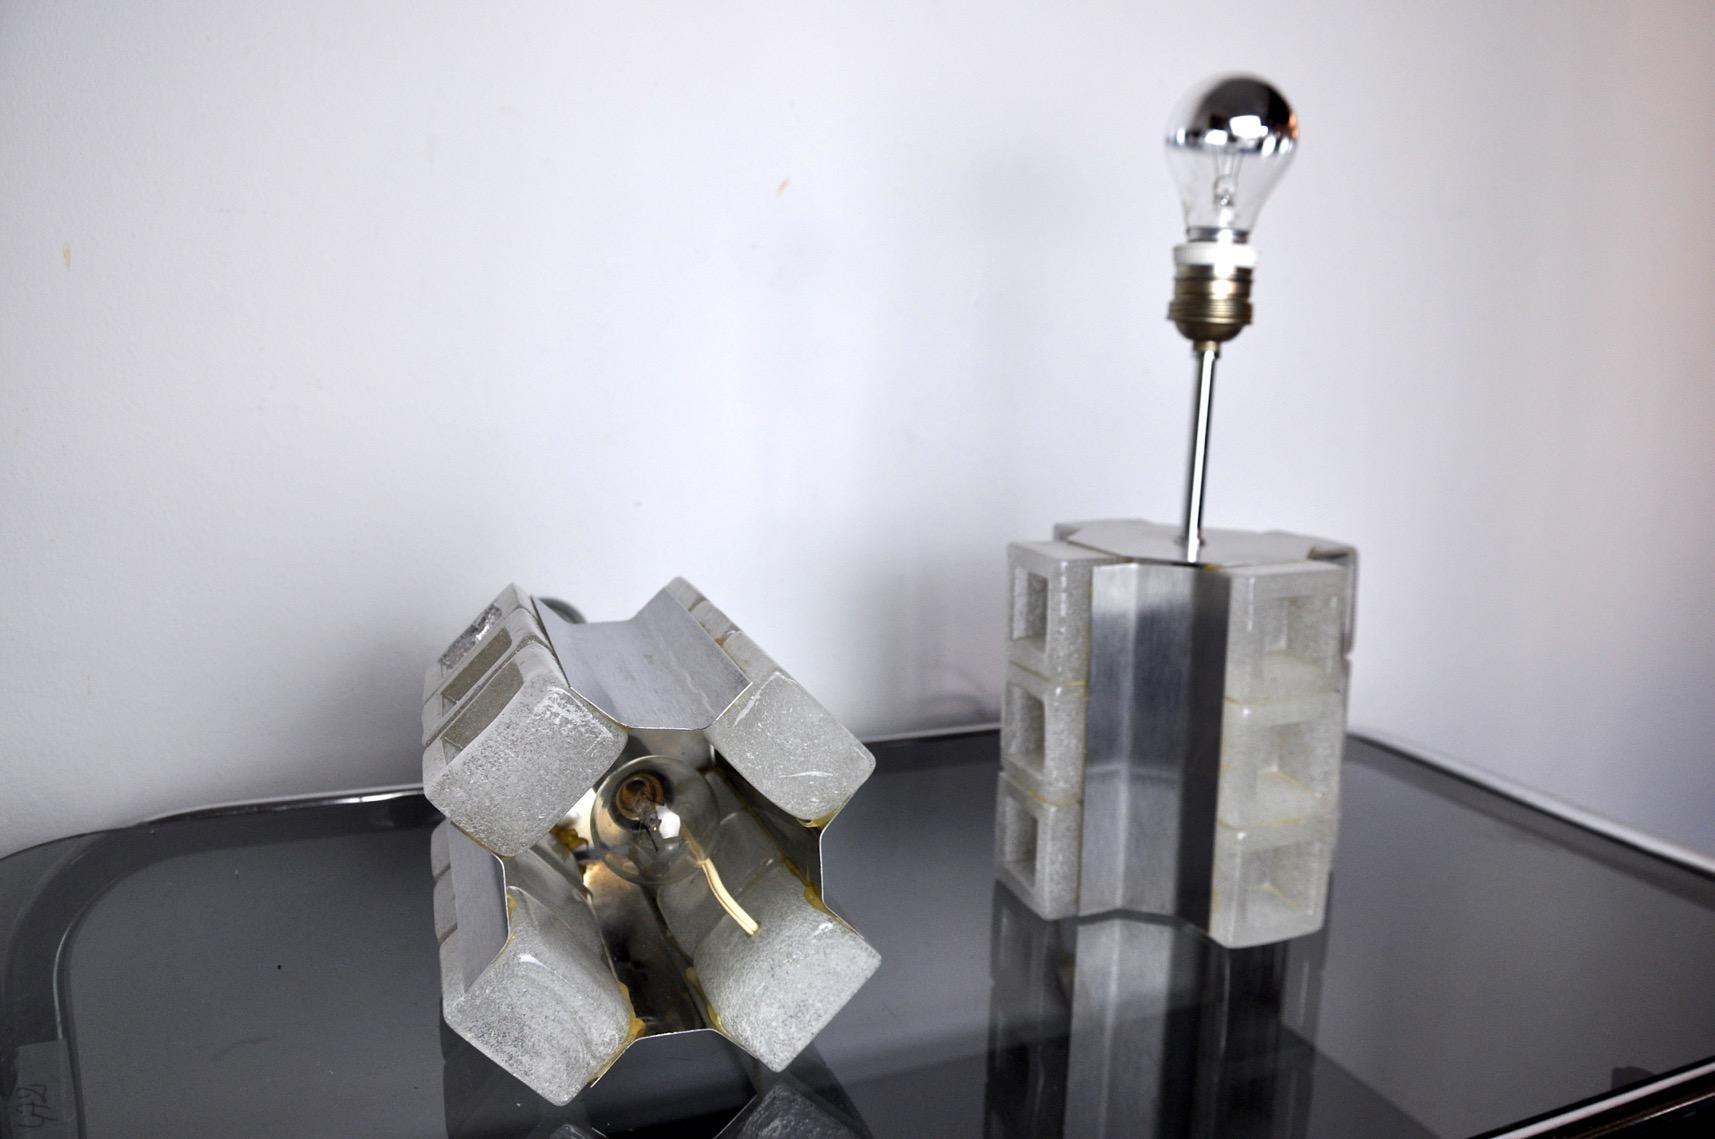 Pair of Poliarte Cubic Lamps by Albano Poli, Murano Glass, Italy, 1960 For Sale 2